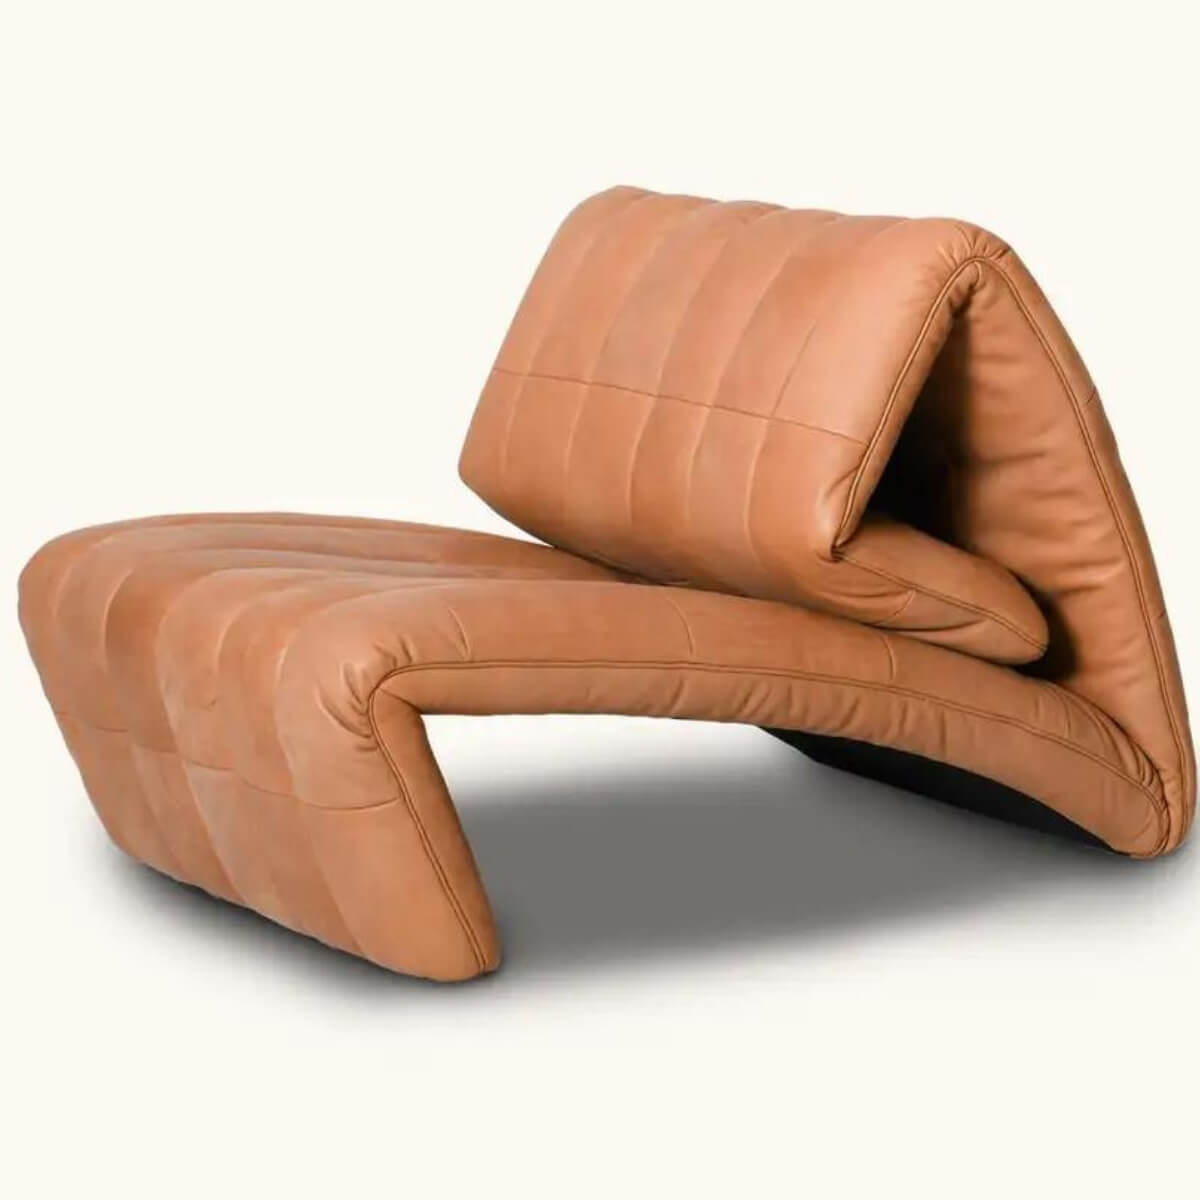 desede-leather-arm-chair-in-Australia-4